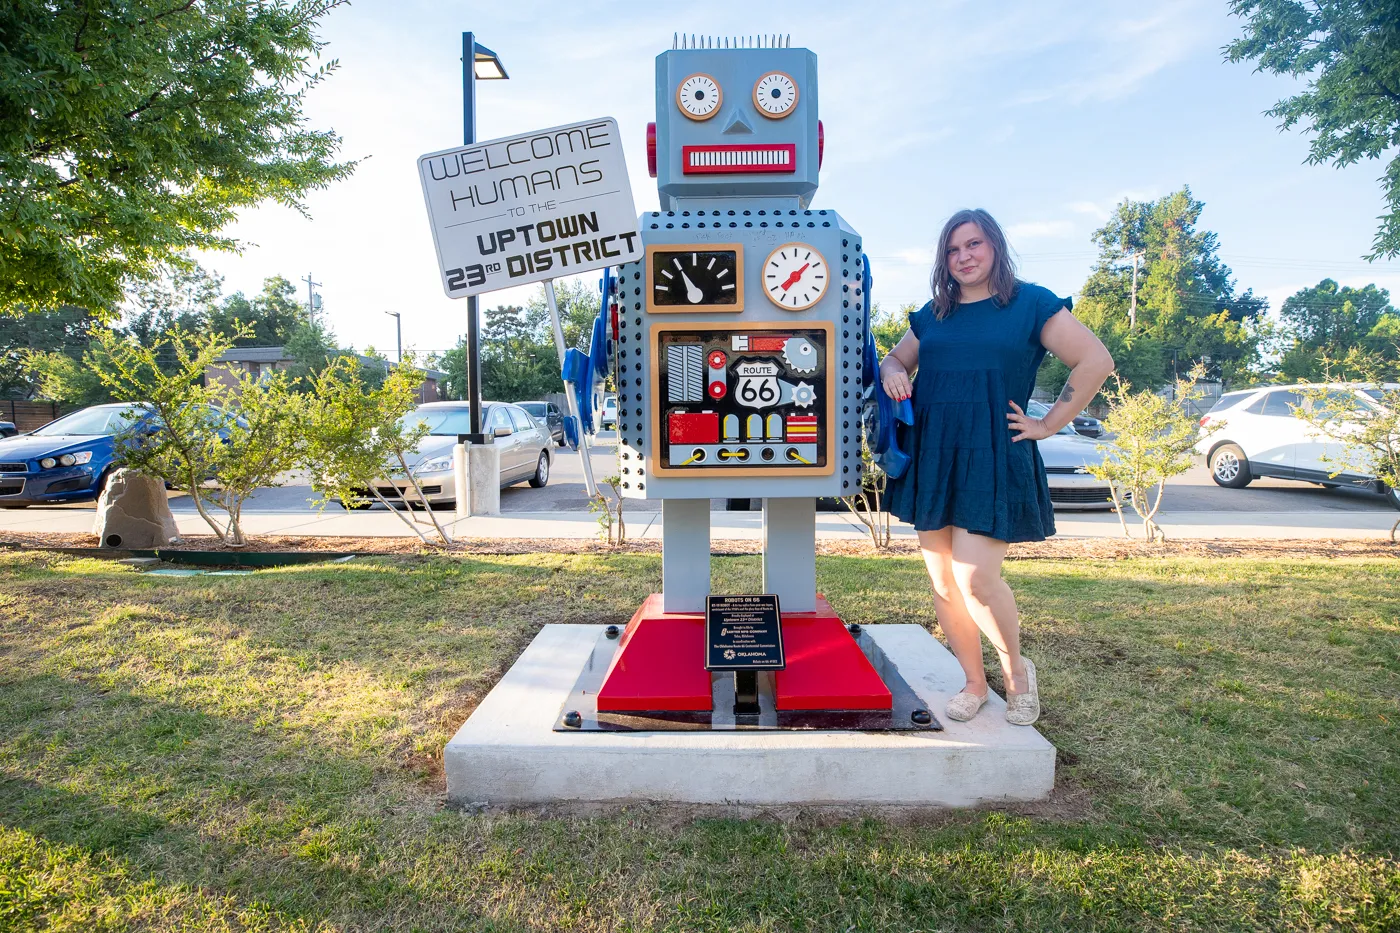 Robots on 66 in Oklahoma City - Route 66 roadside attraction